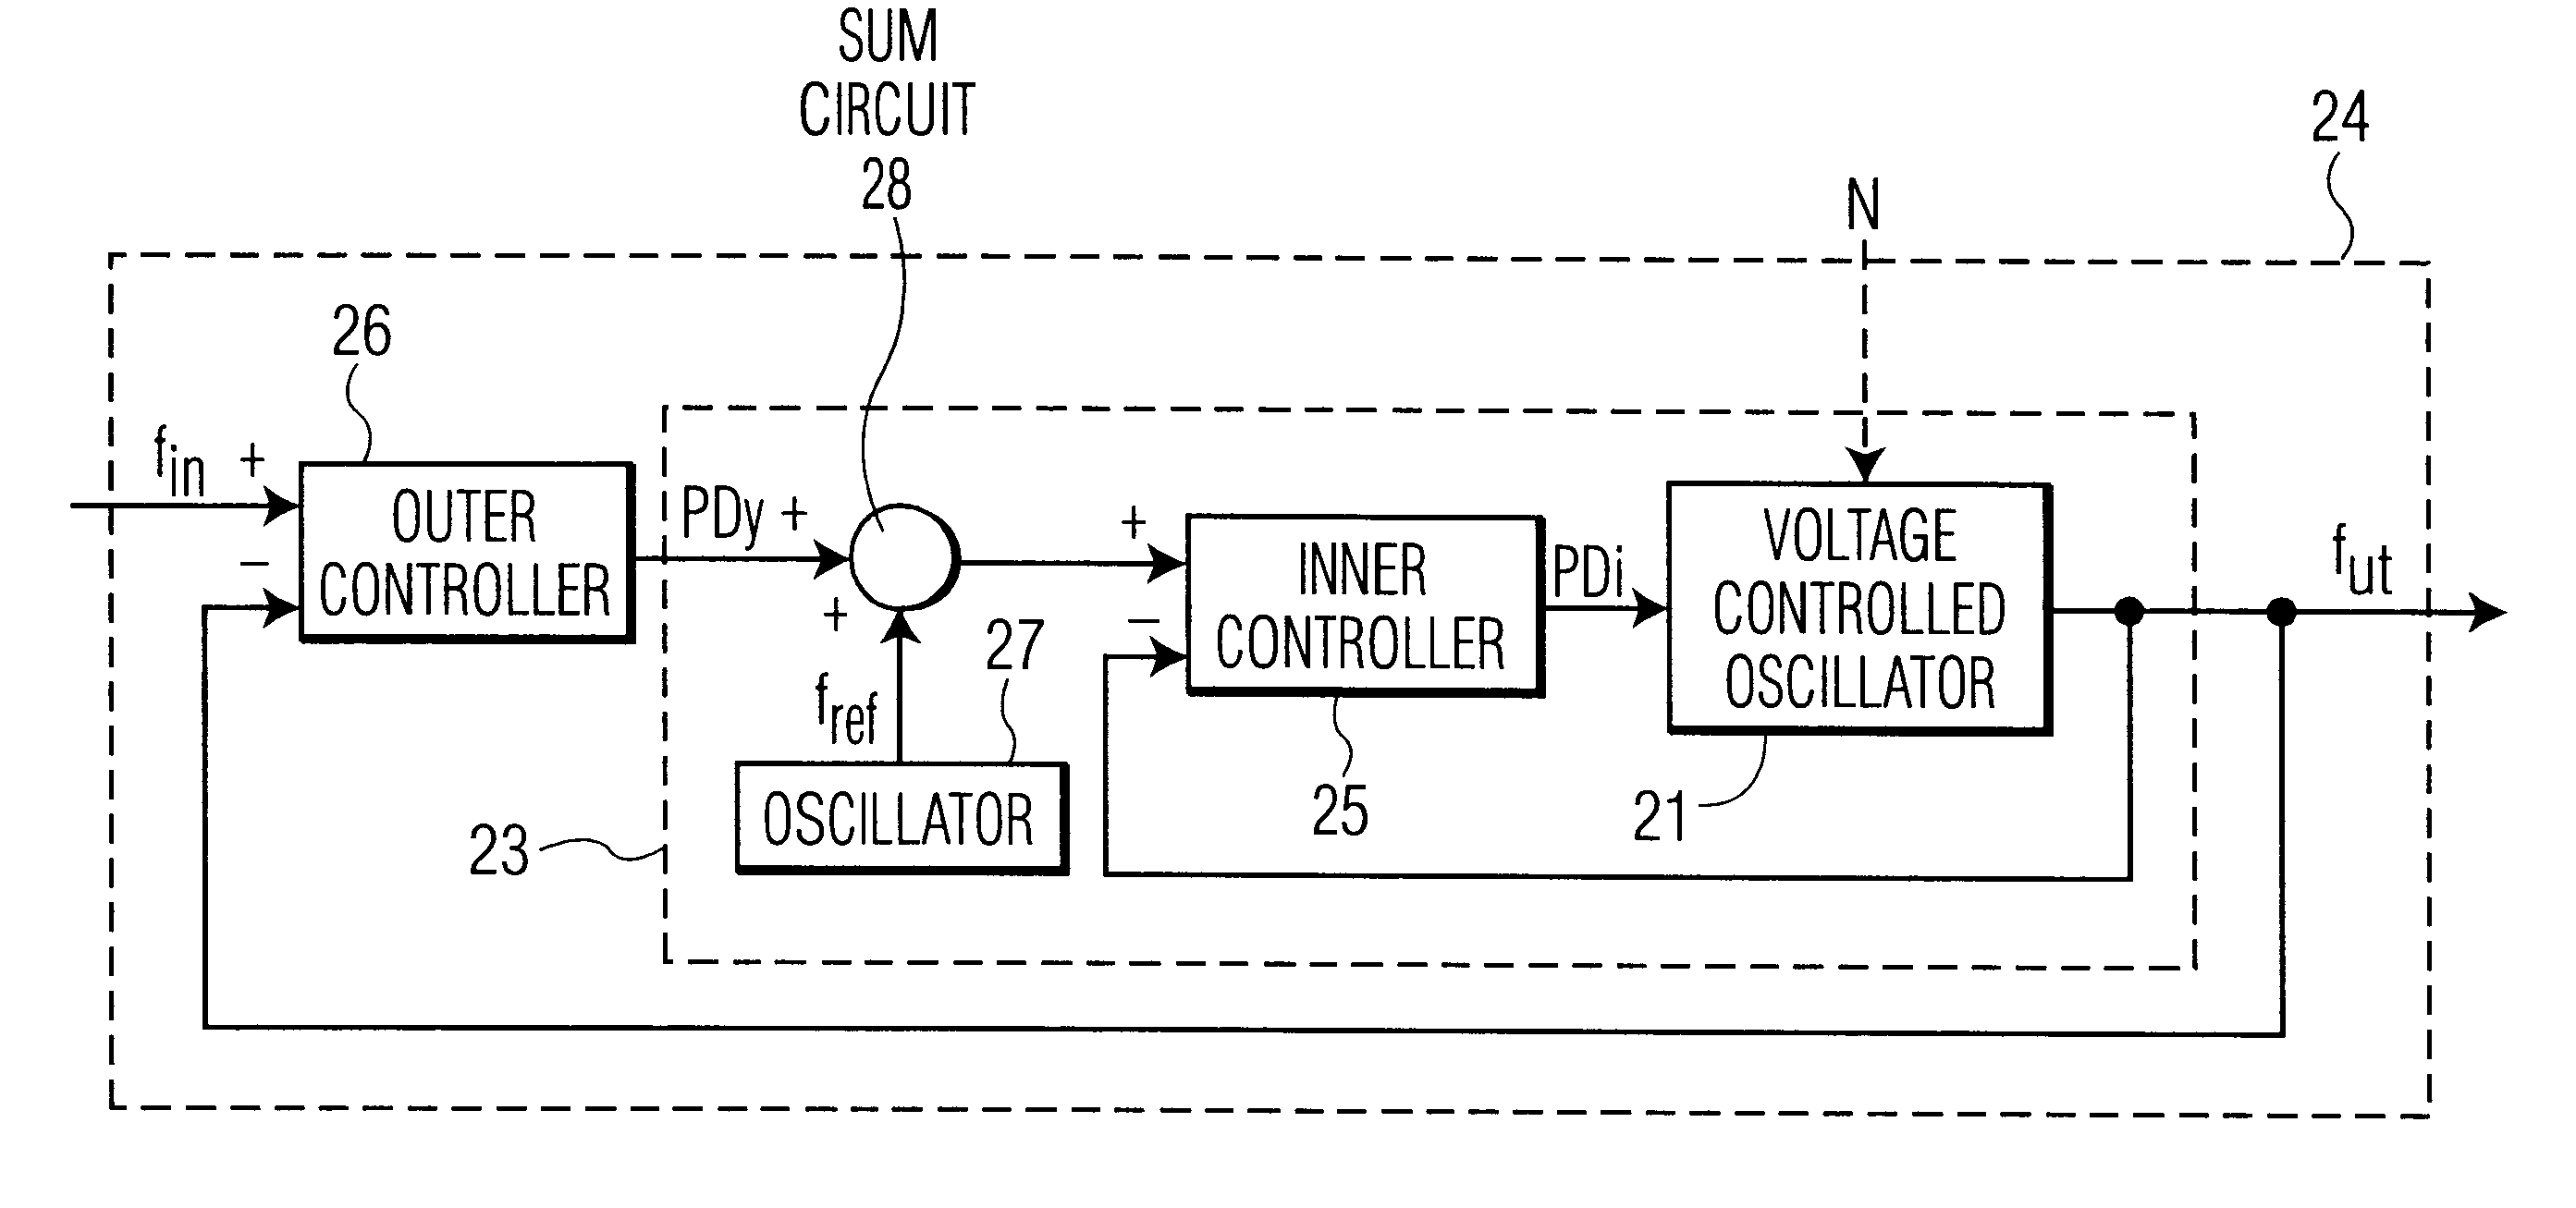 Phase locked loop control via inner and outer feedback control circuits